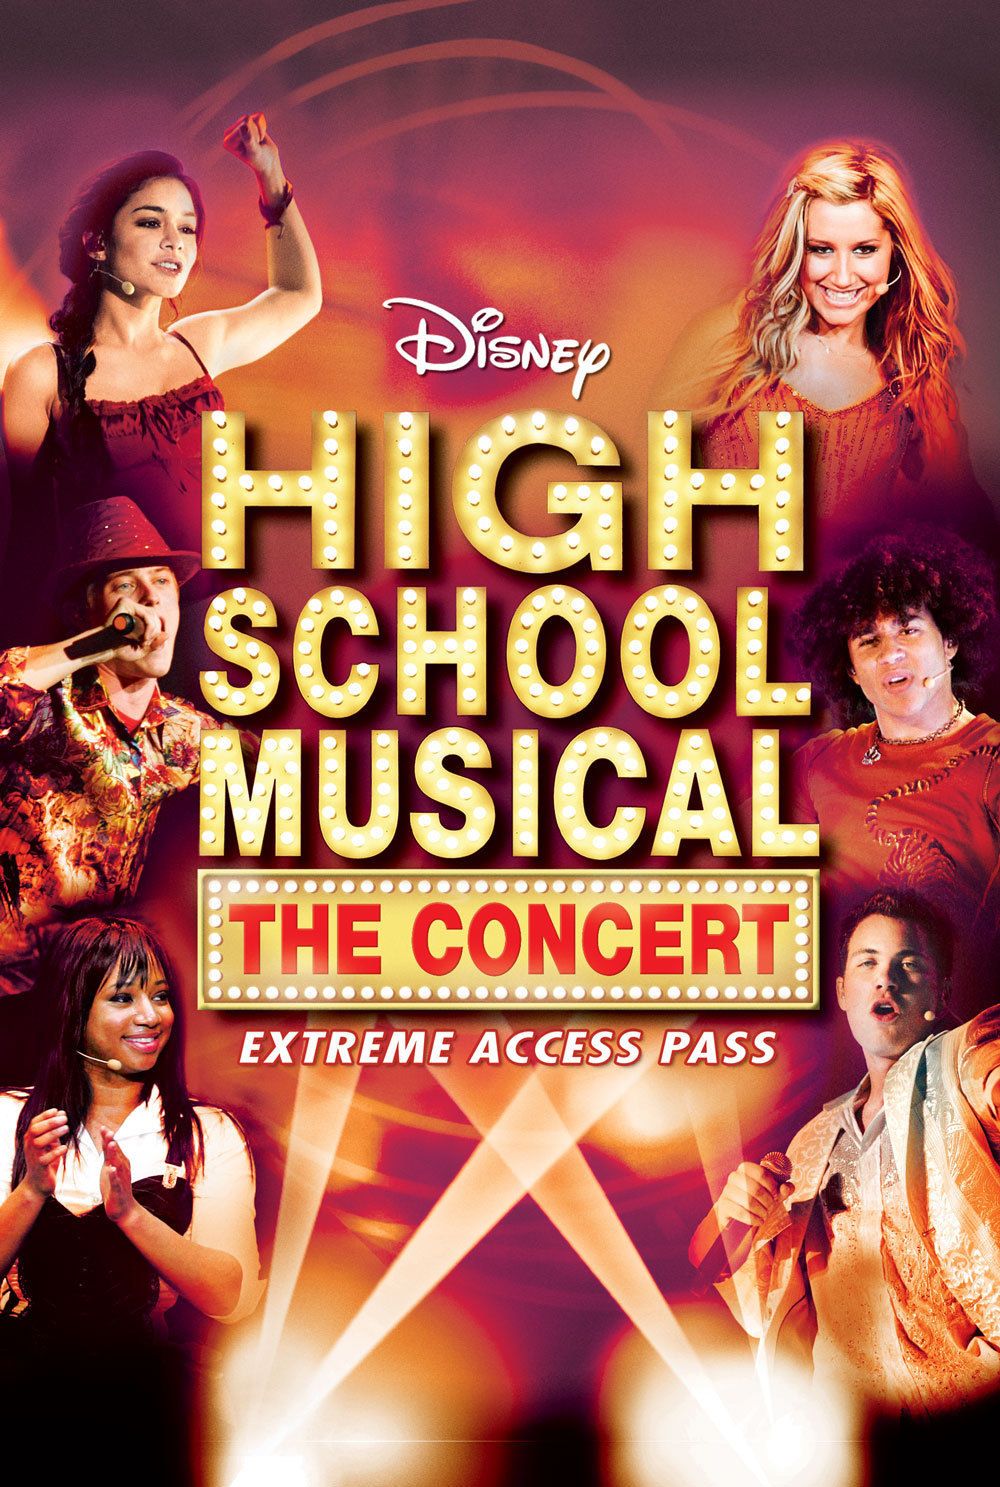 High School Musical: The Musical: The Series Wallpapers